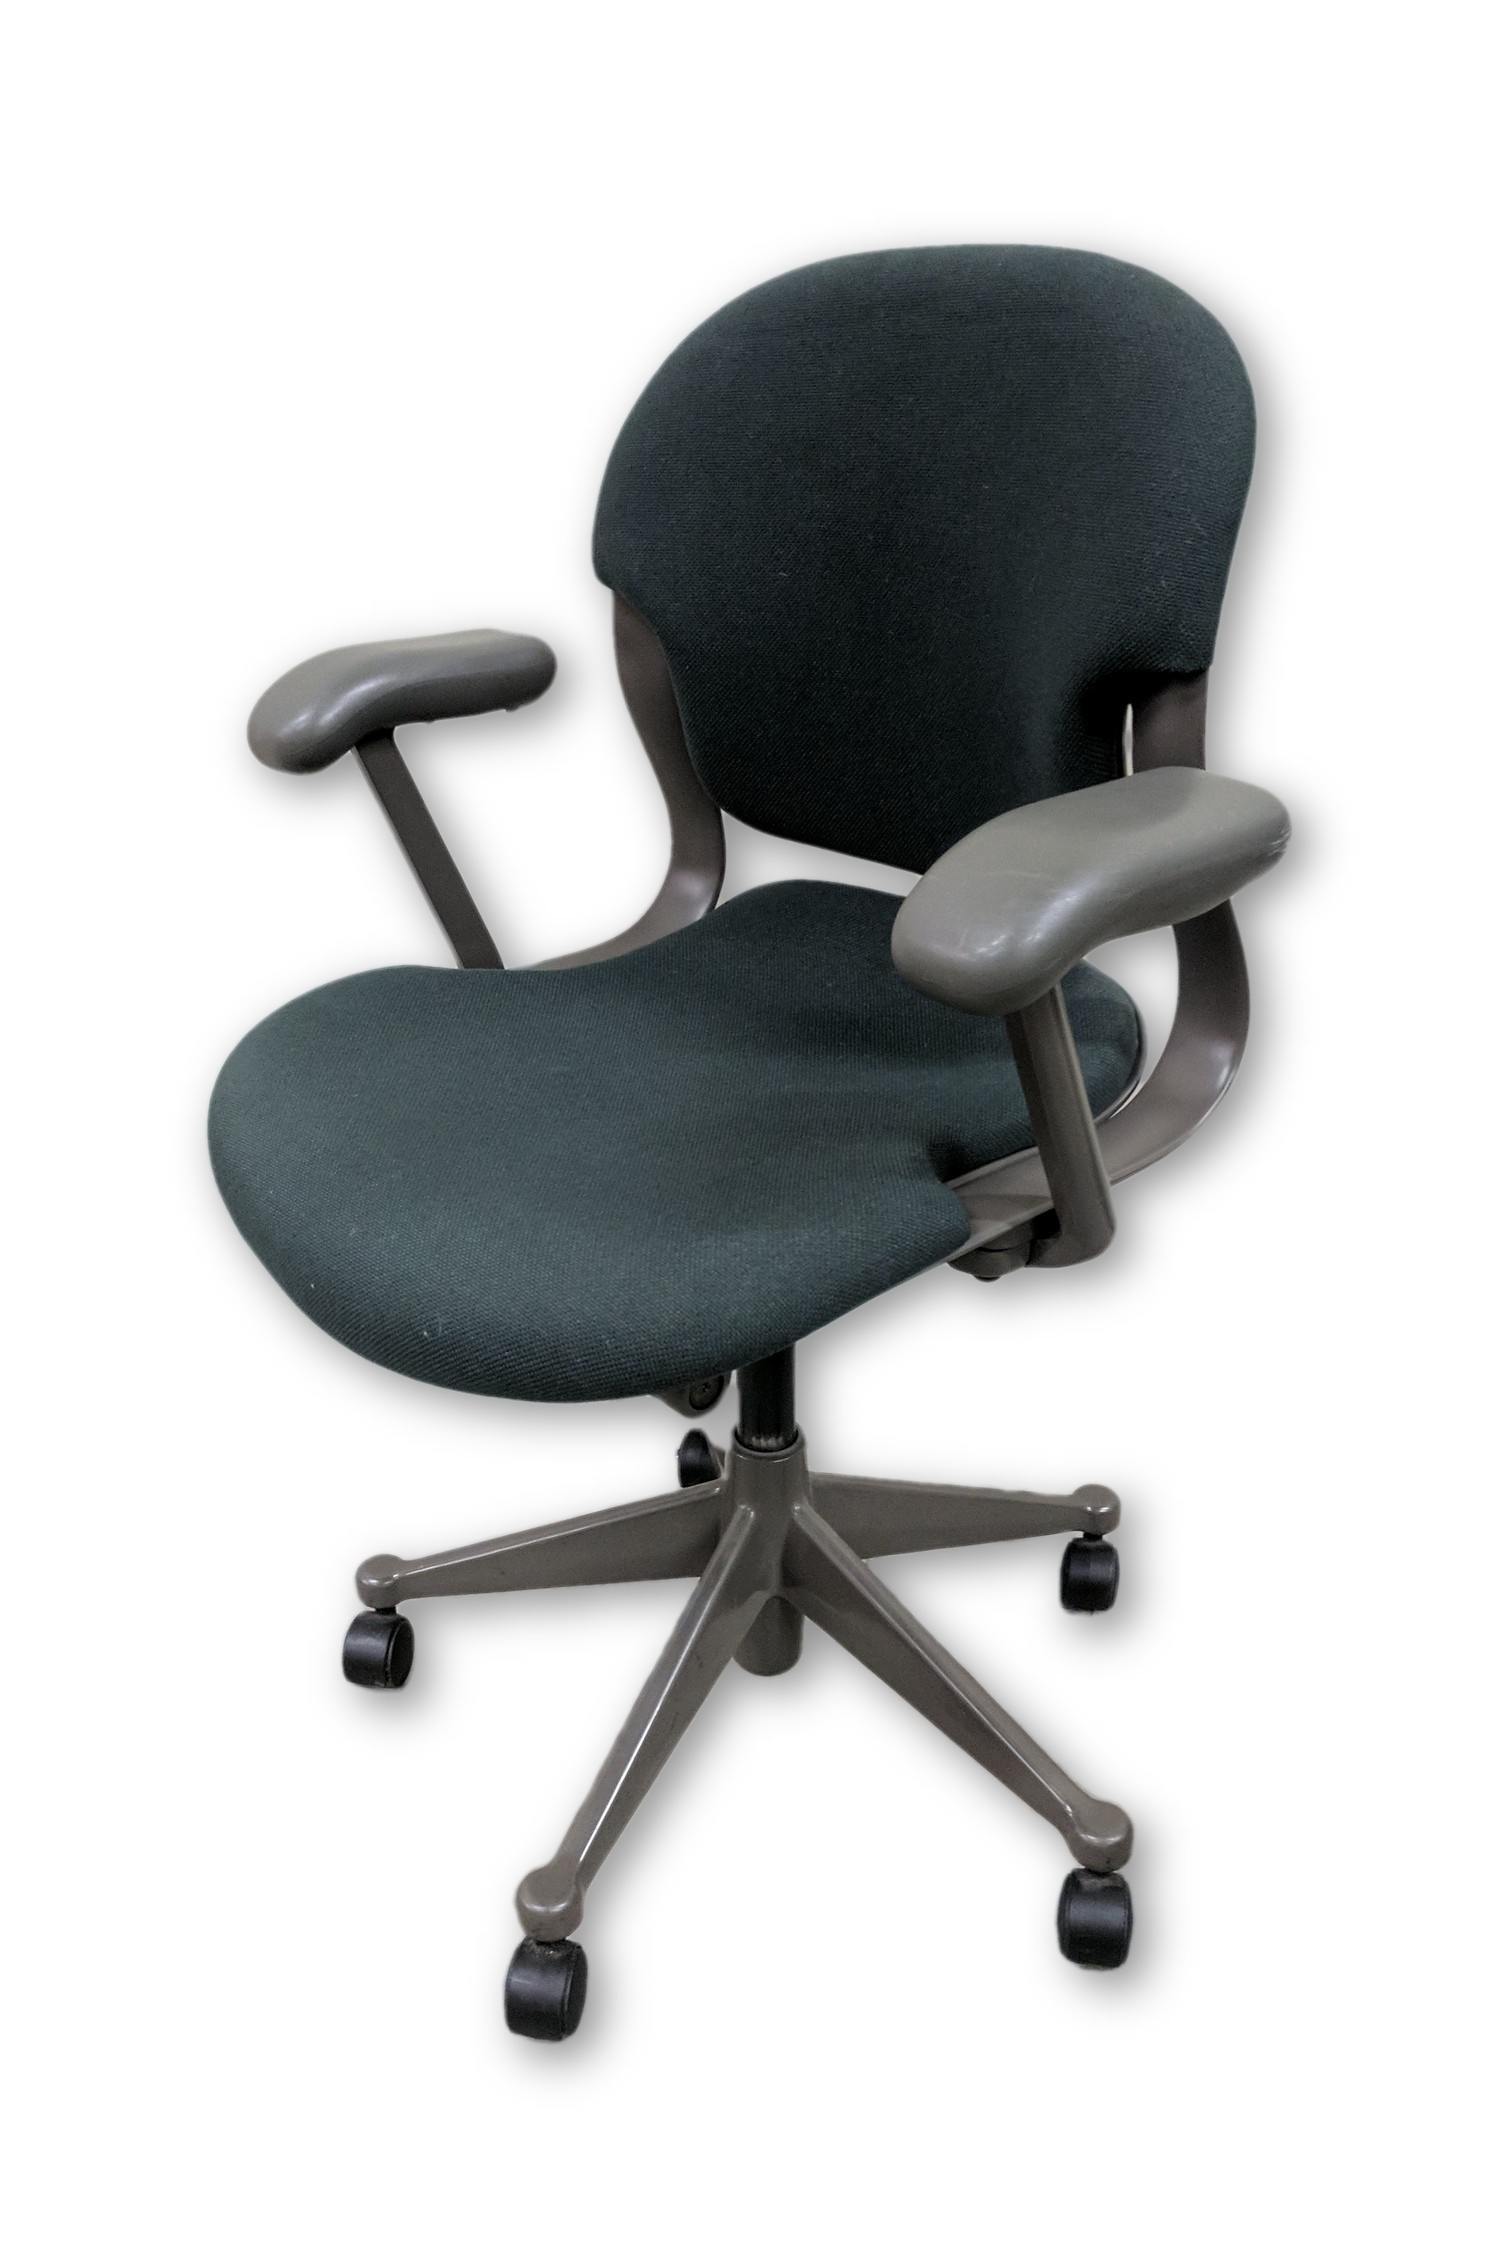 Dark Green LowBack Rolling Office Chairs Madison